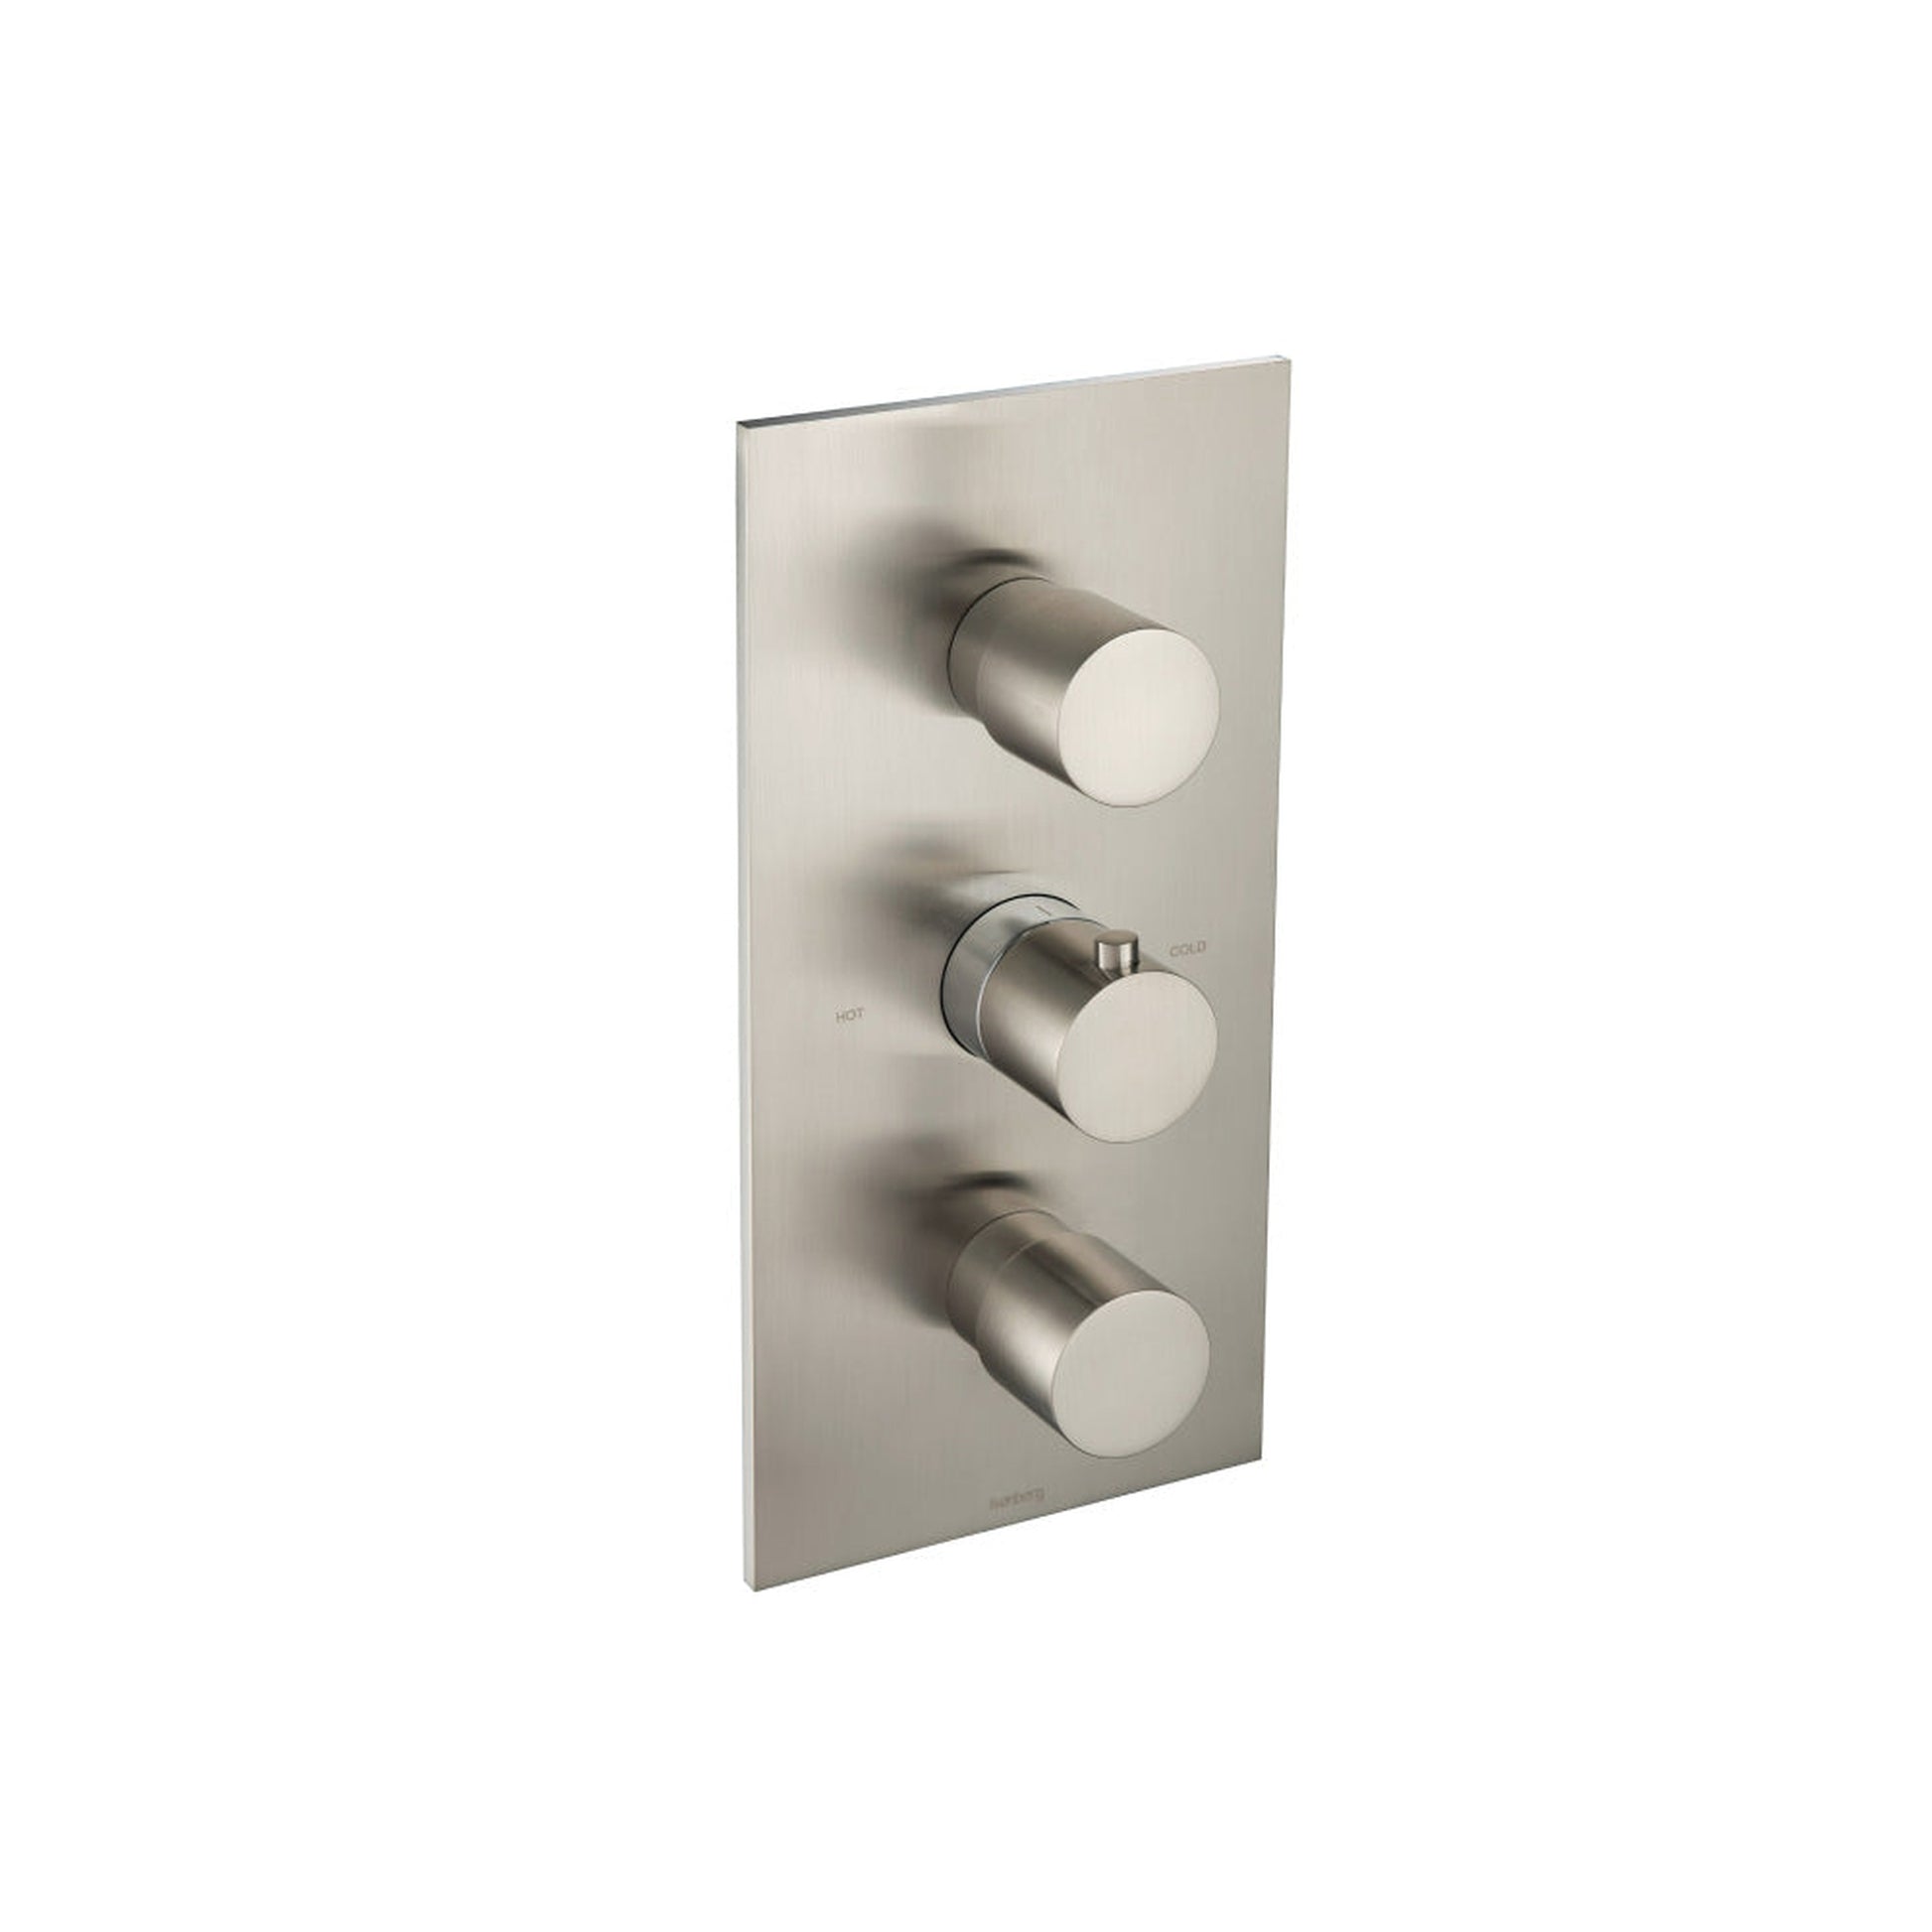 Isenberg Serie 100 Three Output Thermostatic Trim Set in Brushed Nickel